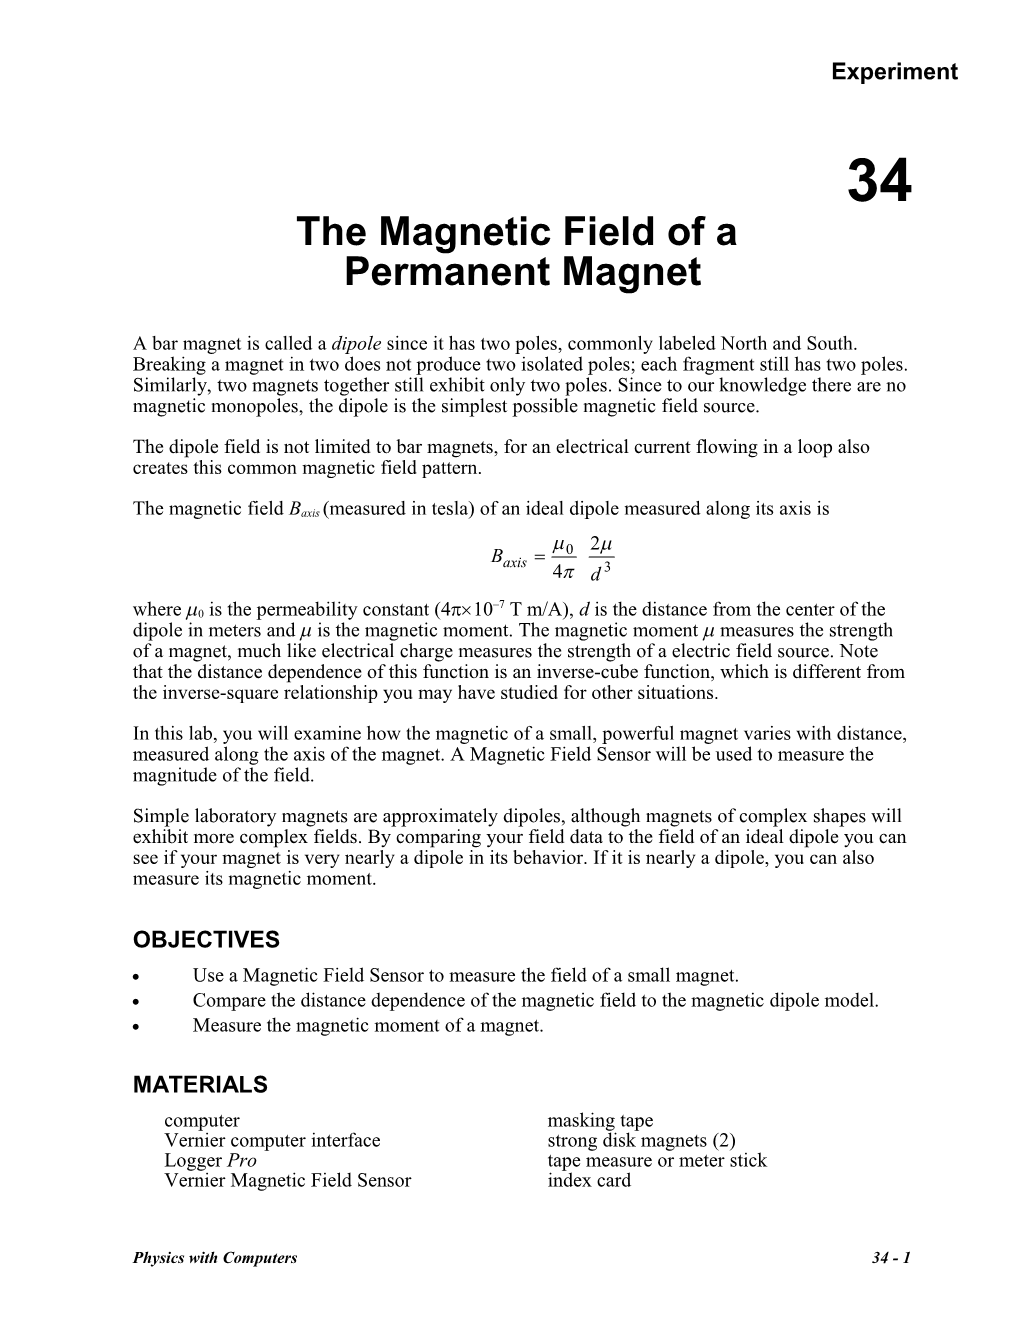 Magnetic Field of a Permanent Magnet